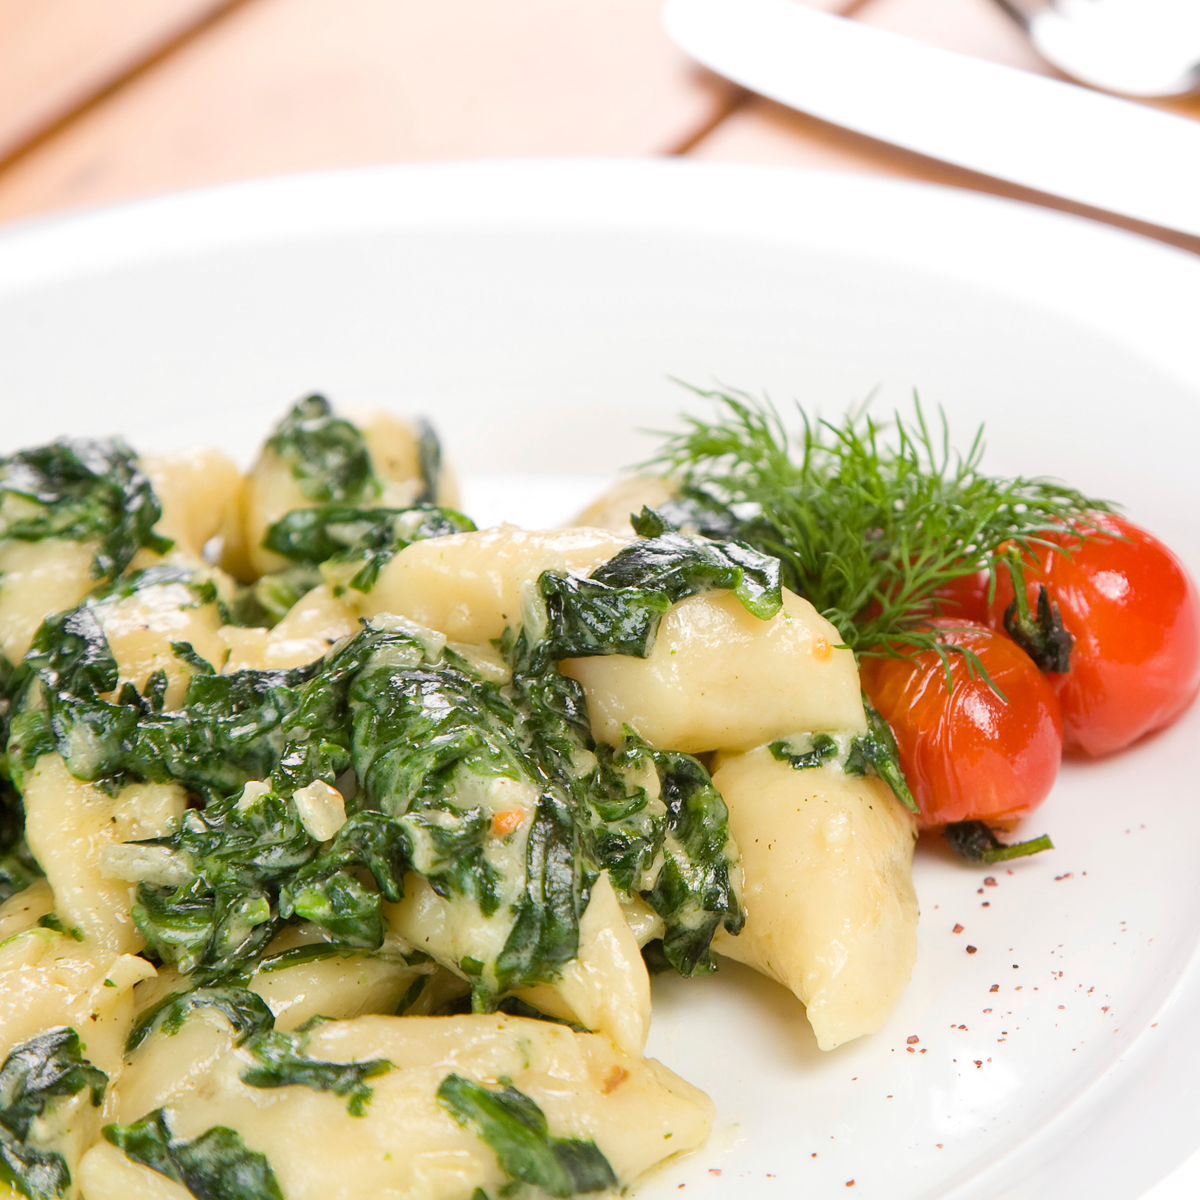 Potato Gnocchi with a puree of  Stinging Nettles, Spinach & Herbs